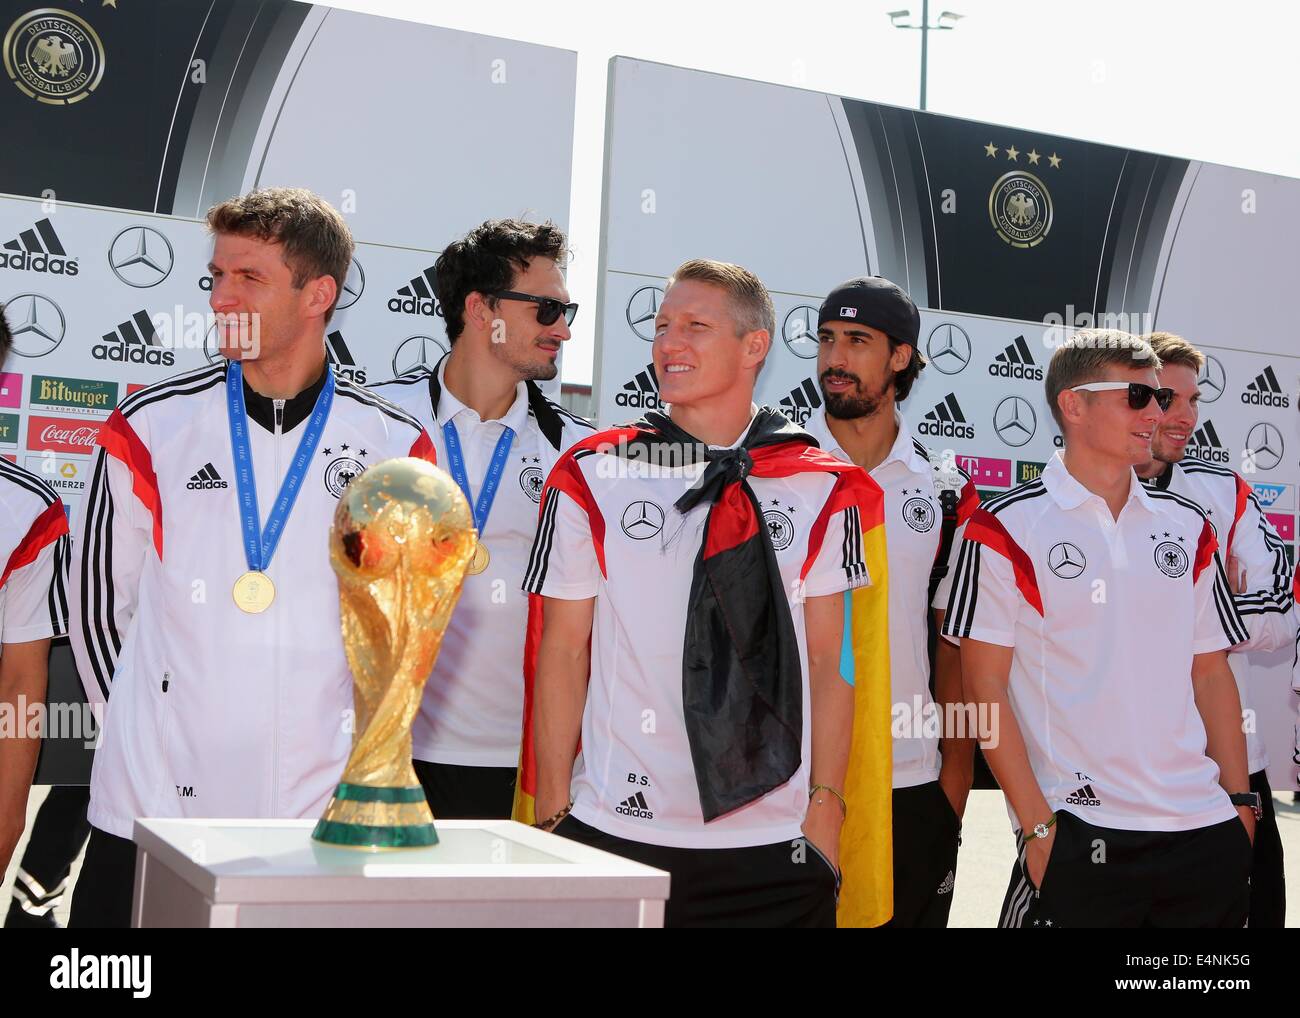 Berlin, Germany. 15th July, 2014. HANDOUT - A handout picture shows the German national soccer players Thomas Mueller (L-R), Mats Hummels, Bastian Schweinsteiger, Sami Khedira and Toni Kroos standing behind the World Cup trophy in Berlin, Germany, 15 July 2014. Photo:dpa/Alamy Live News/dpa/Alamy Live News Stock Photo